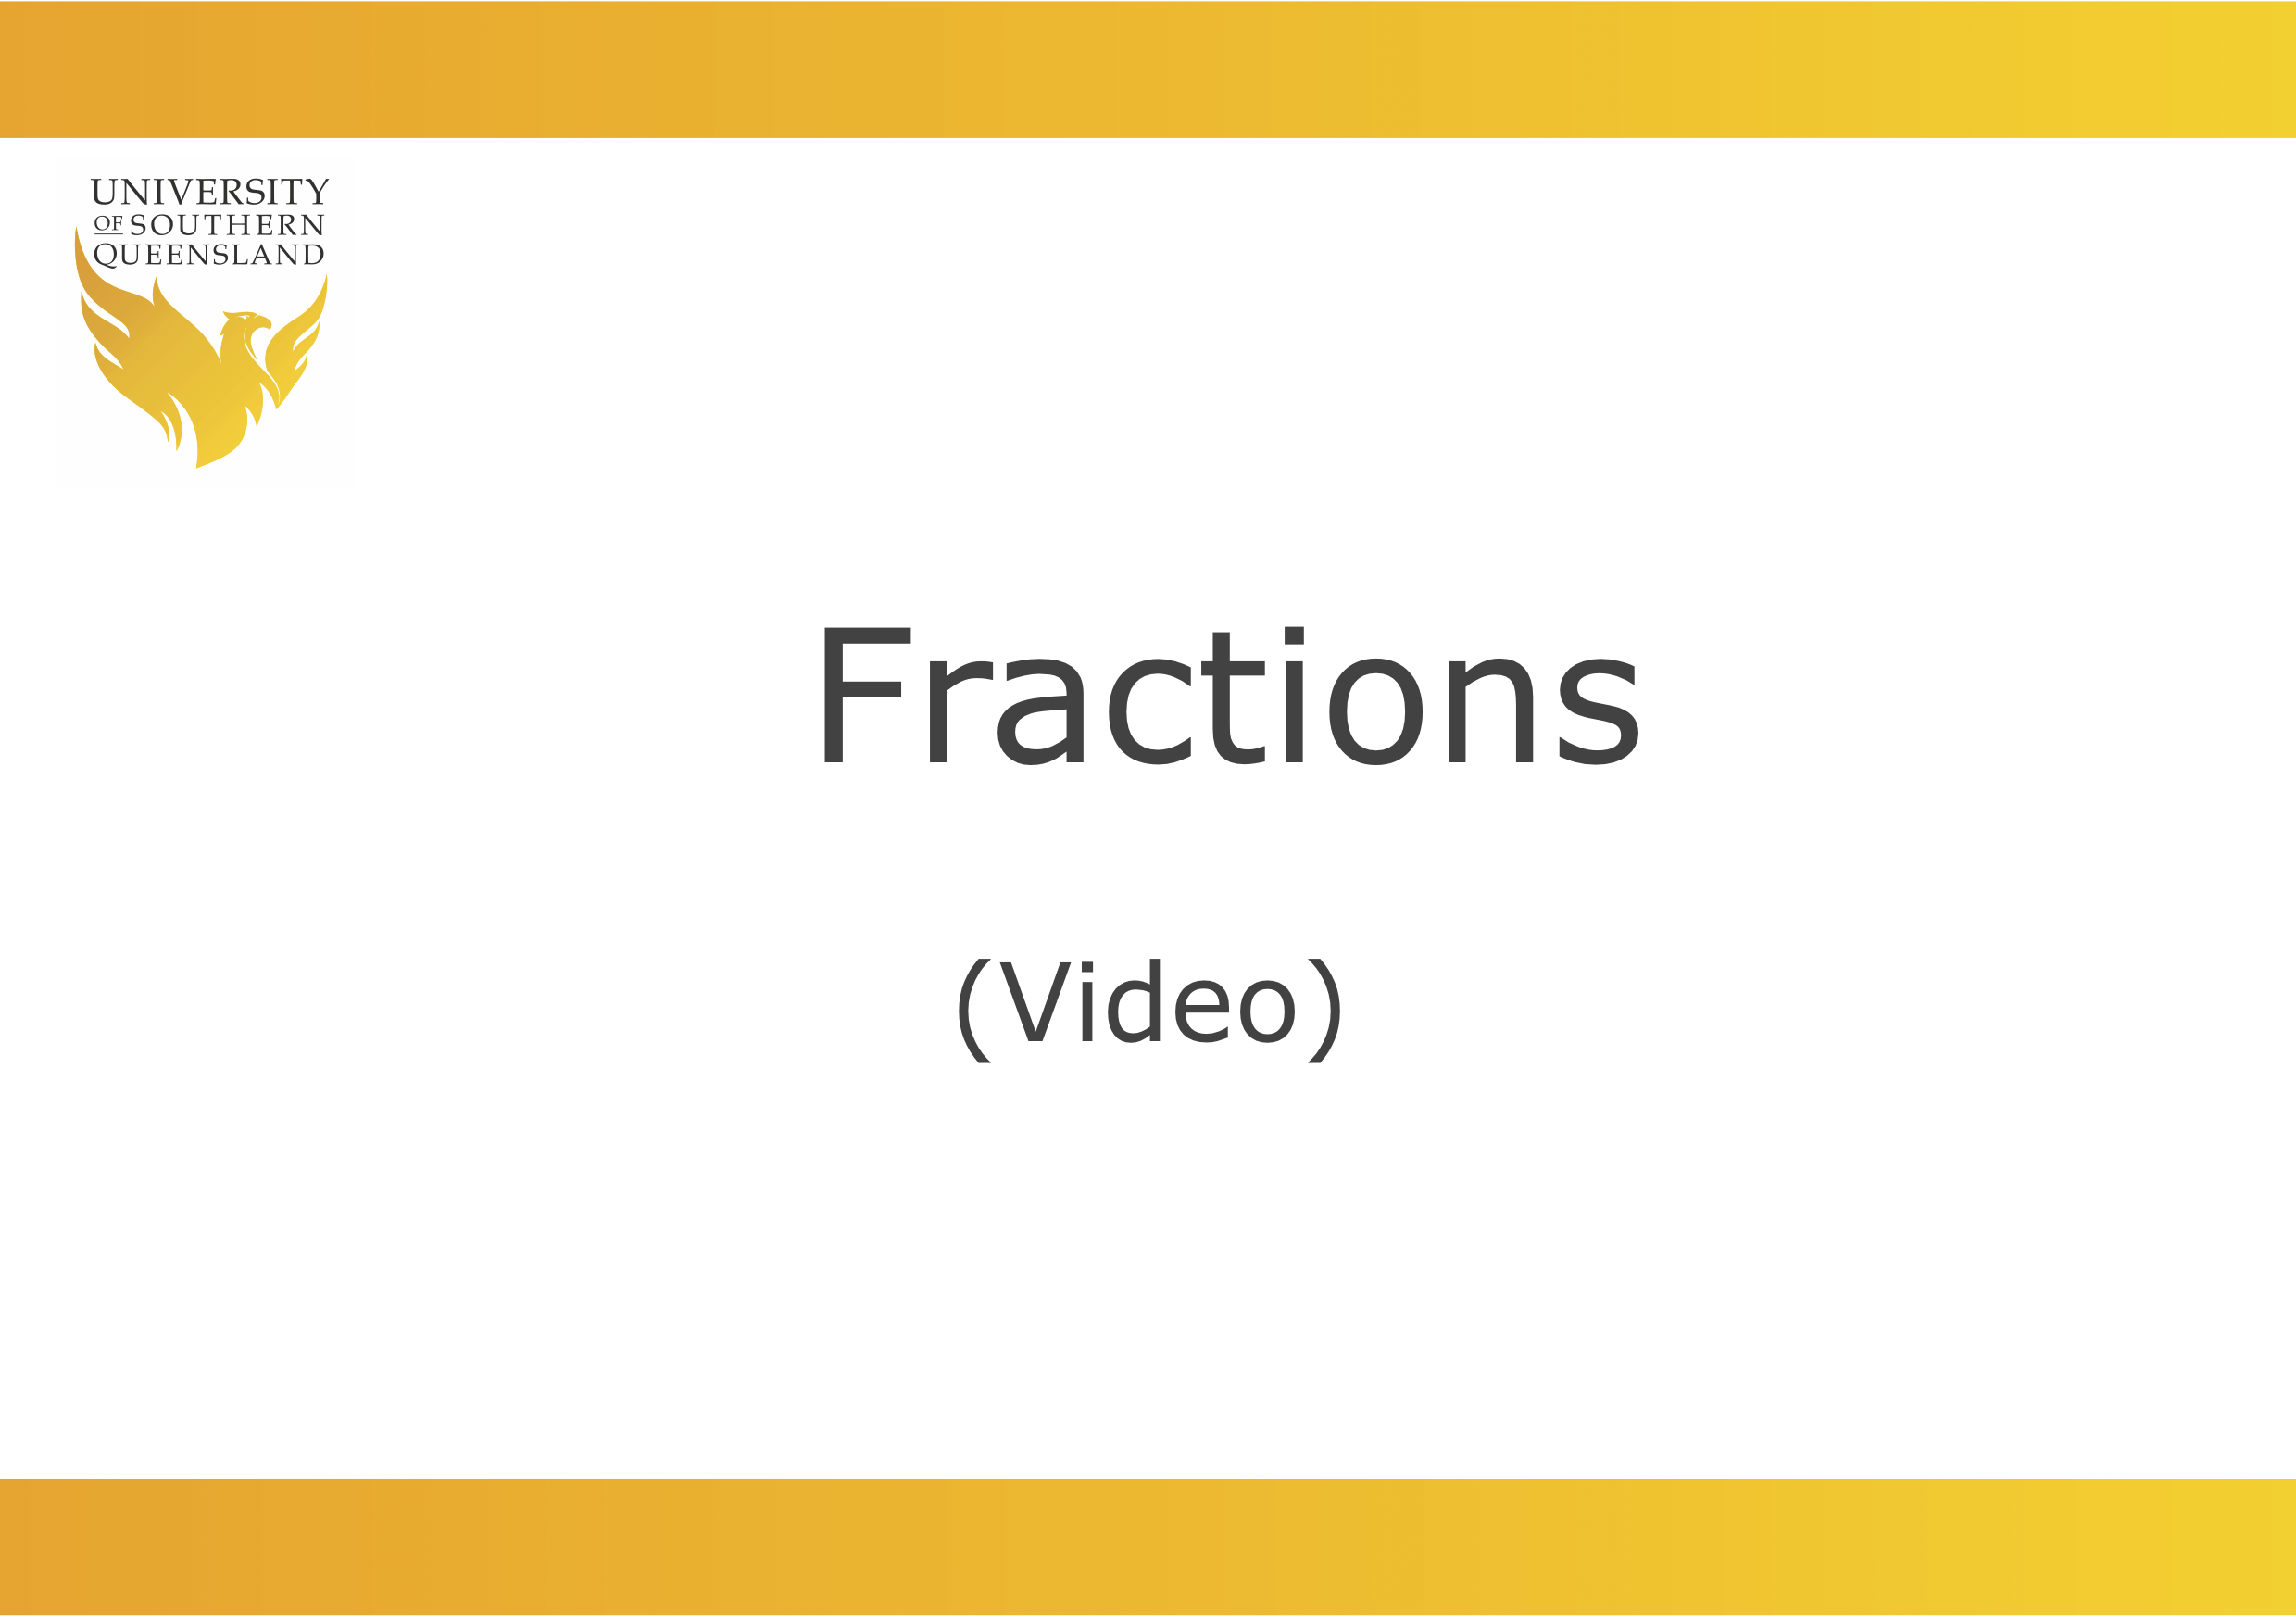 Fractions video